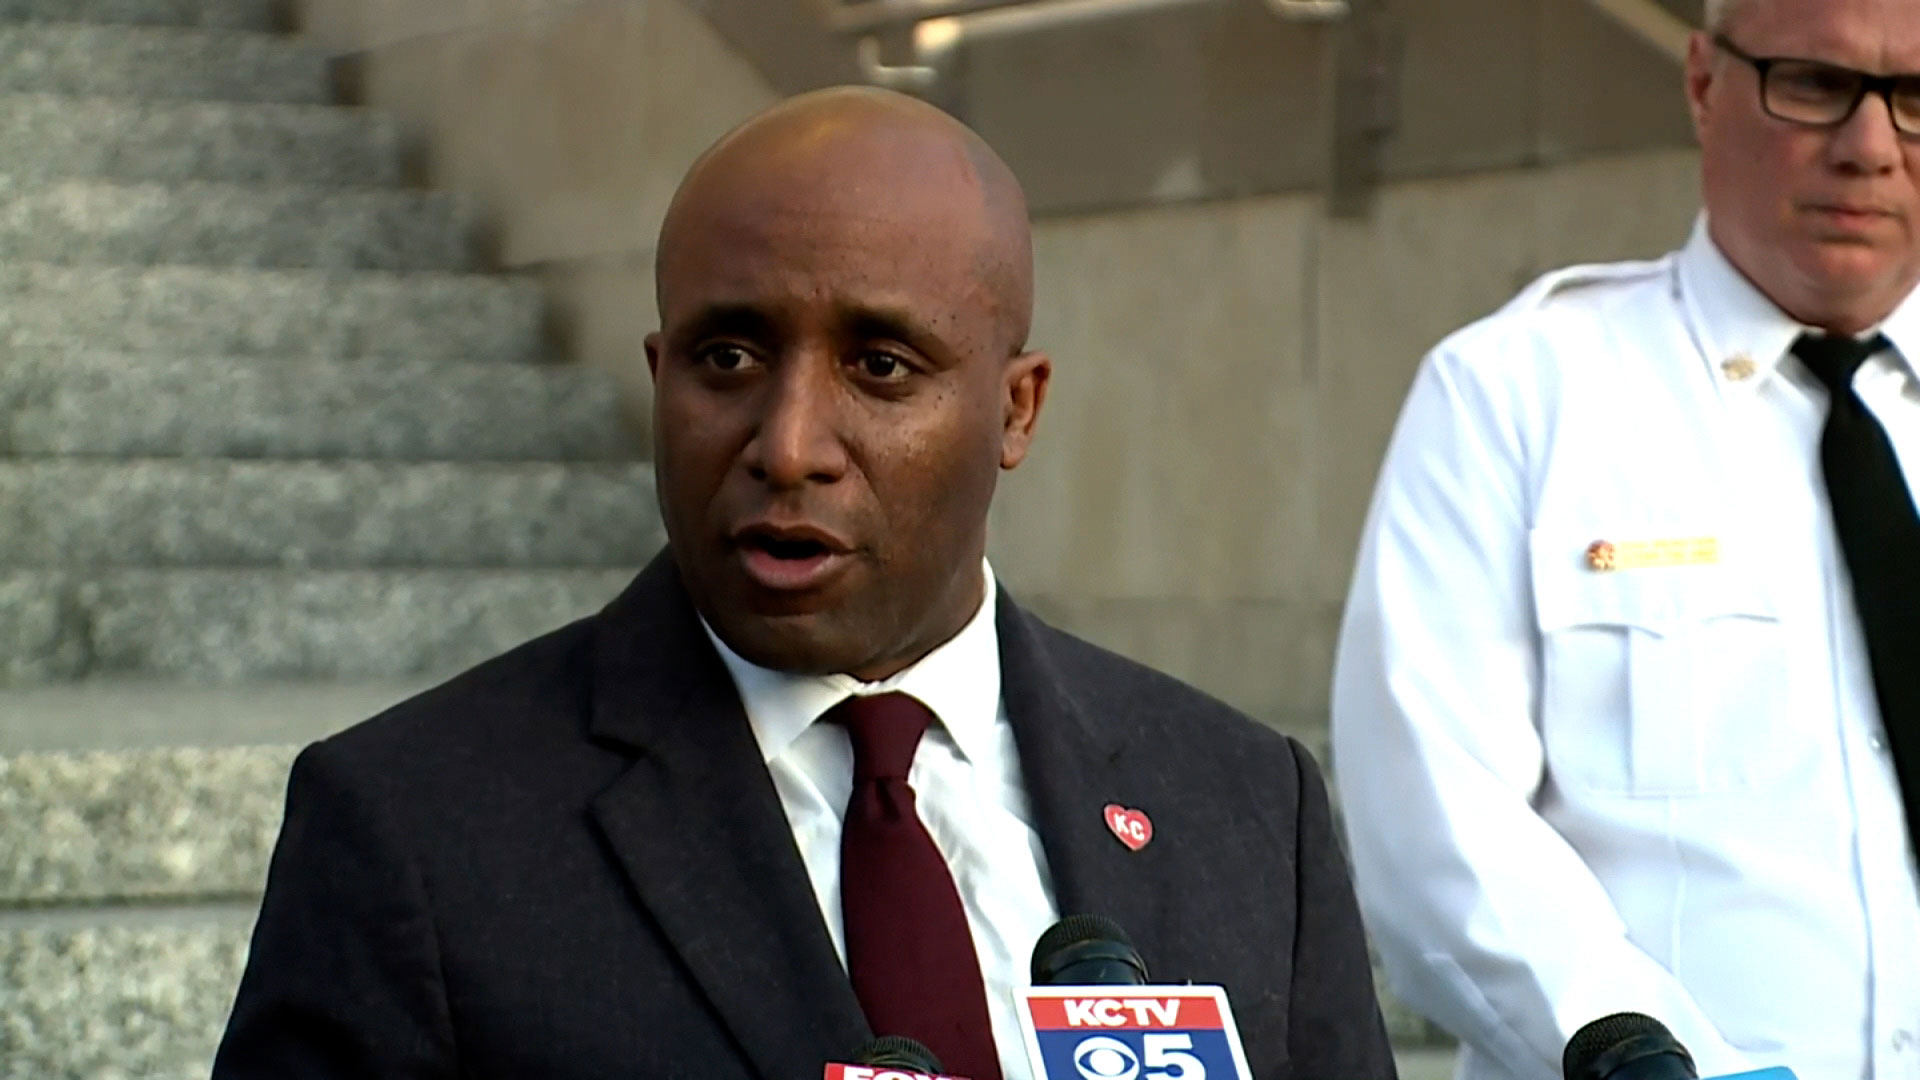 Kansas City Mayor Quinton Lucas speaks during a press conference Wednesday evening.